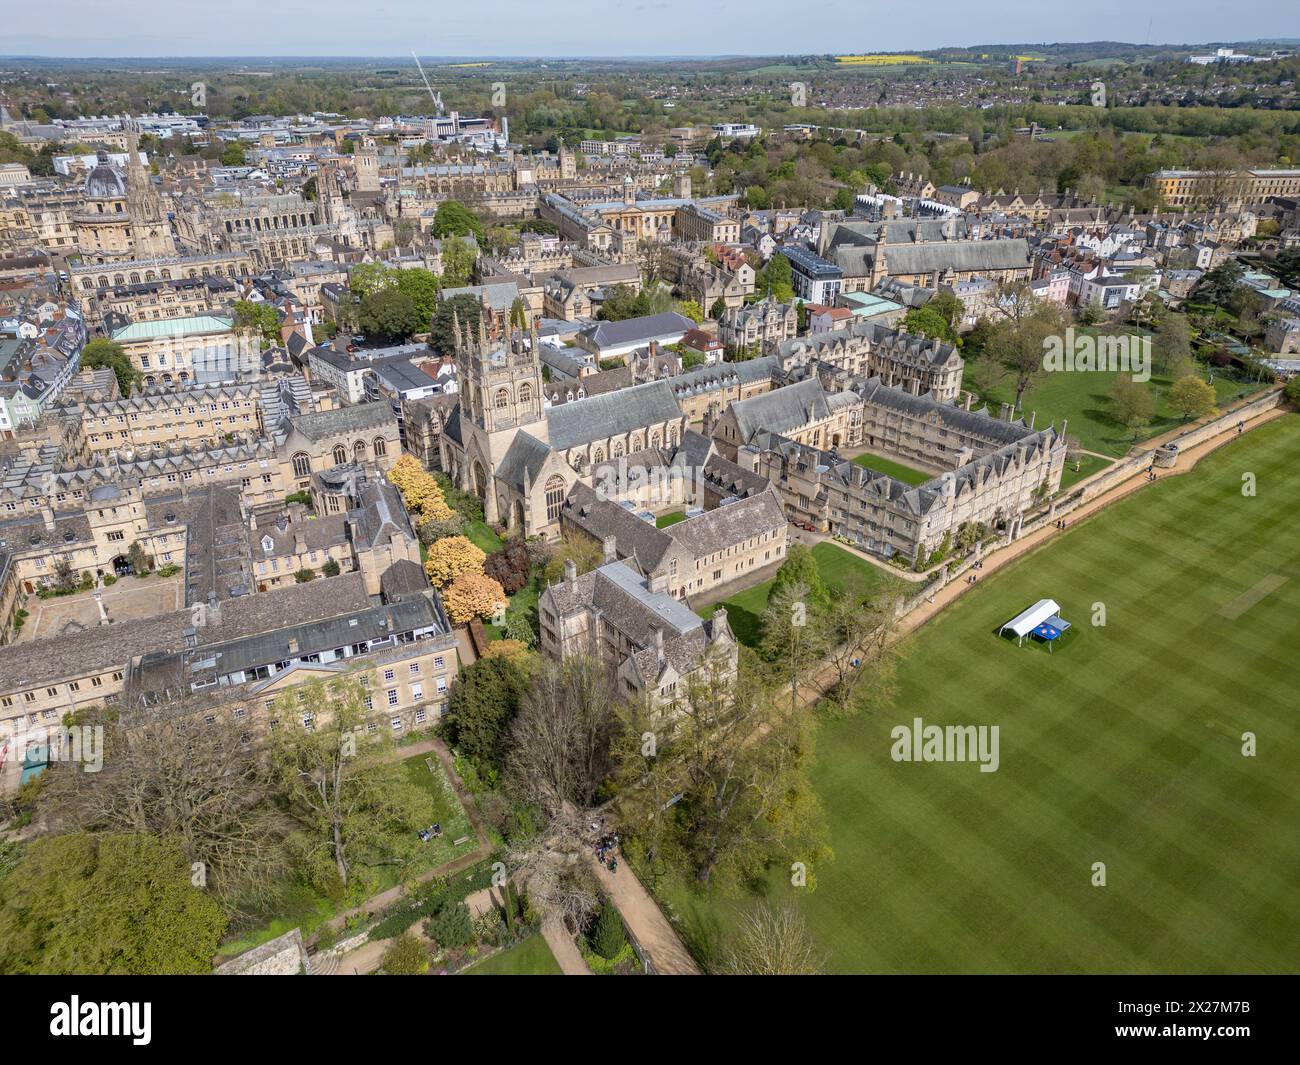 Aerial view of Merton College, University of Oxford, Oxford, UK. Stock Photo